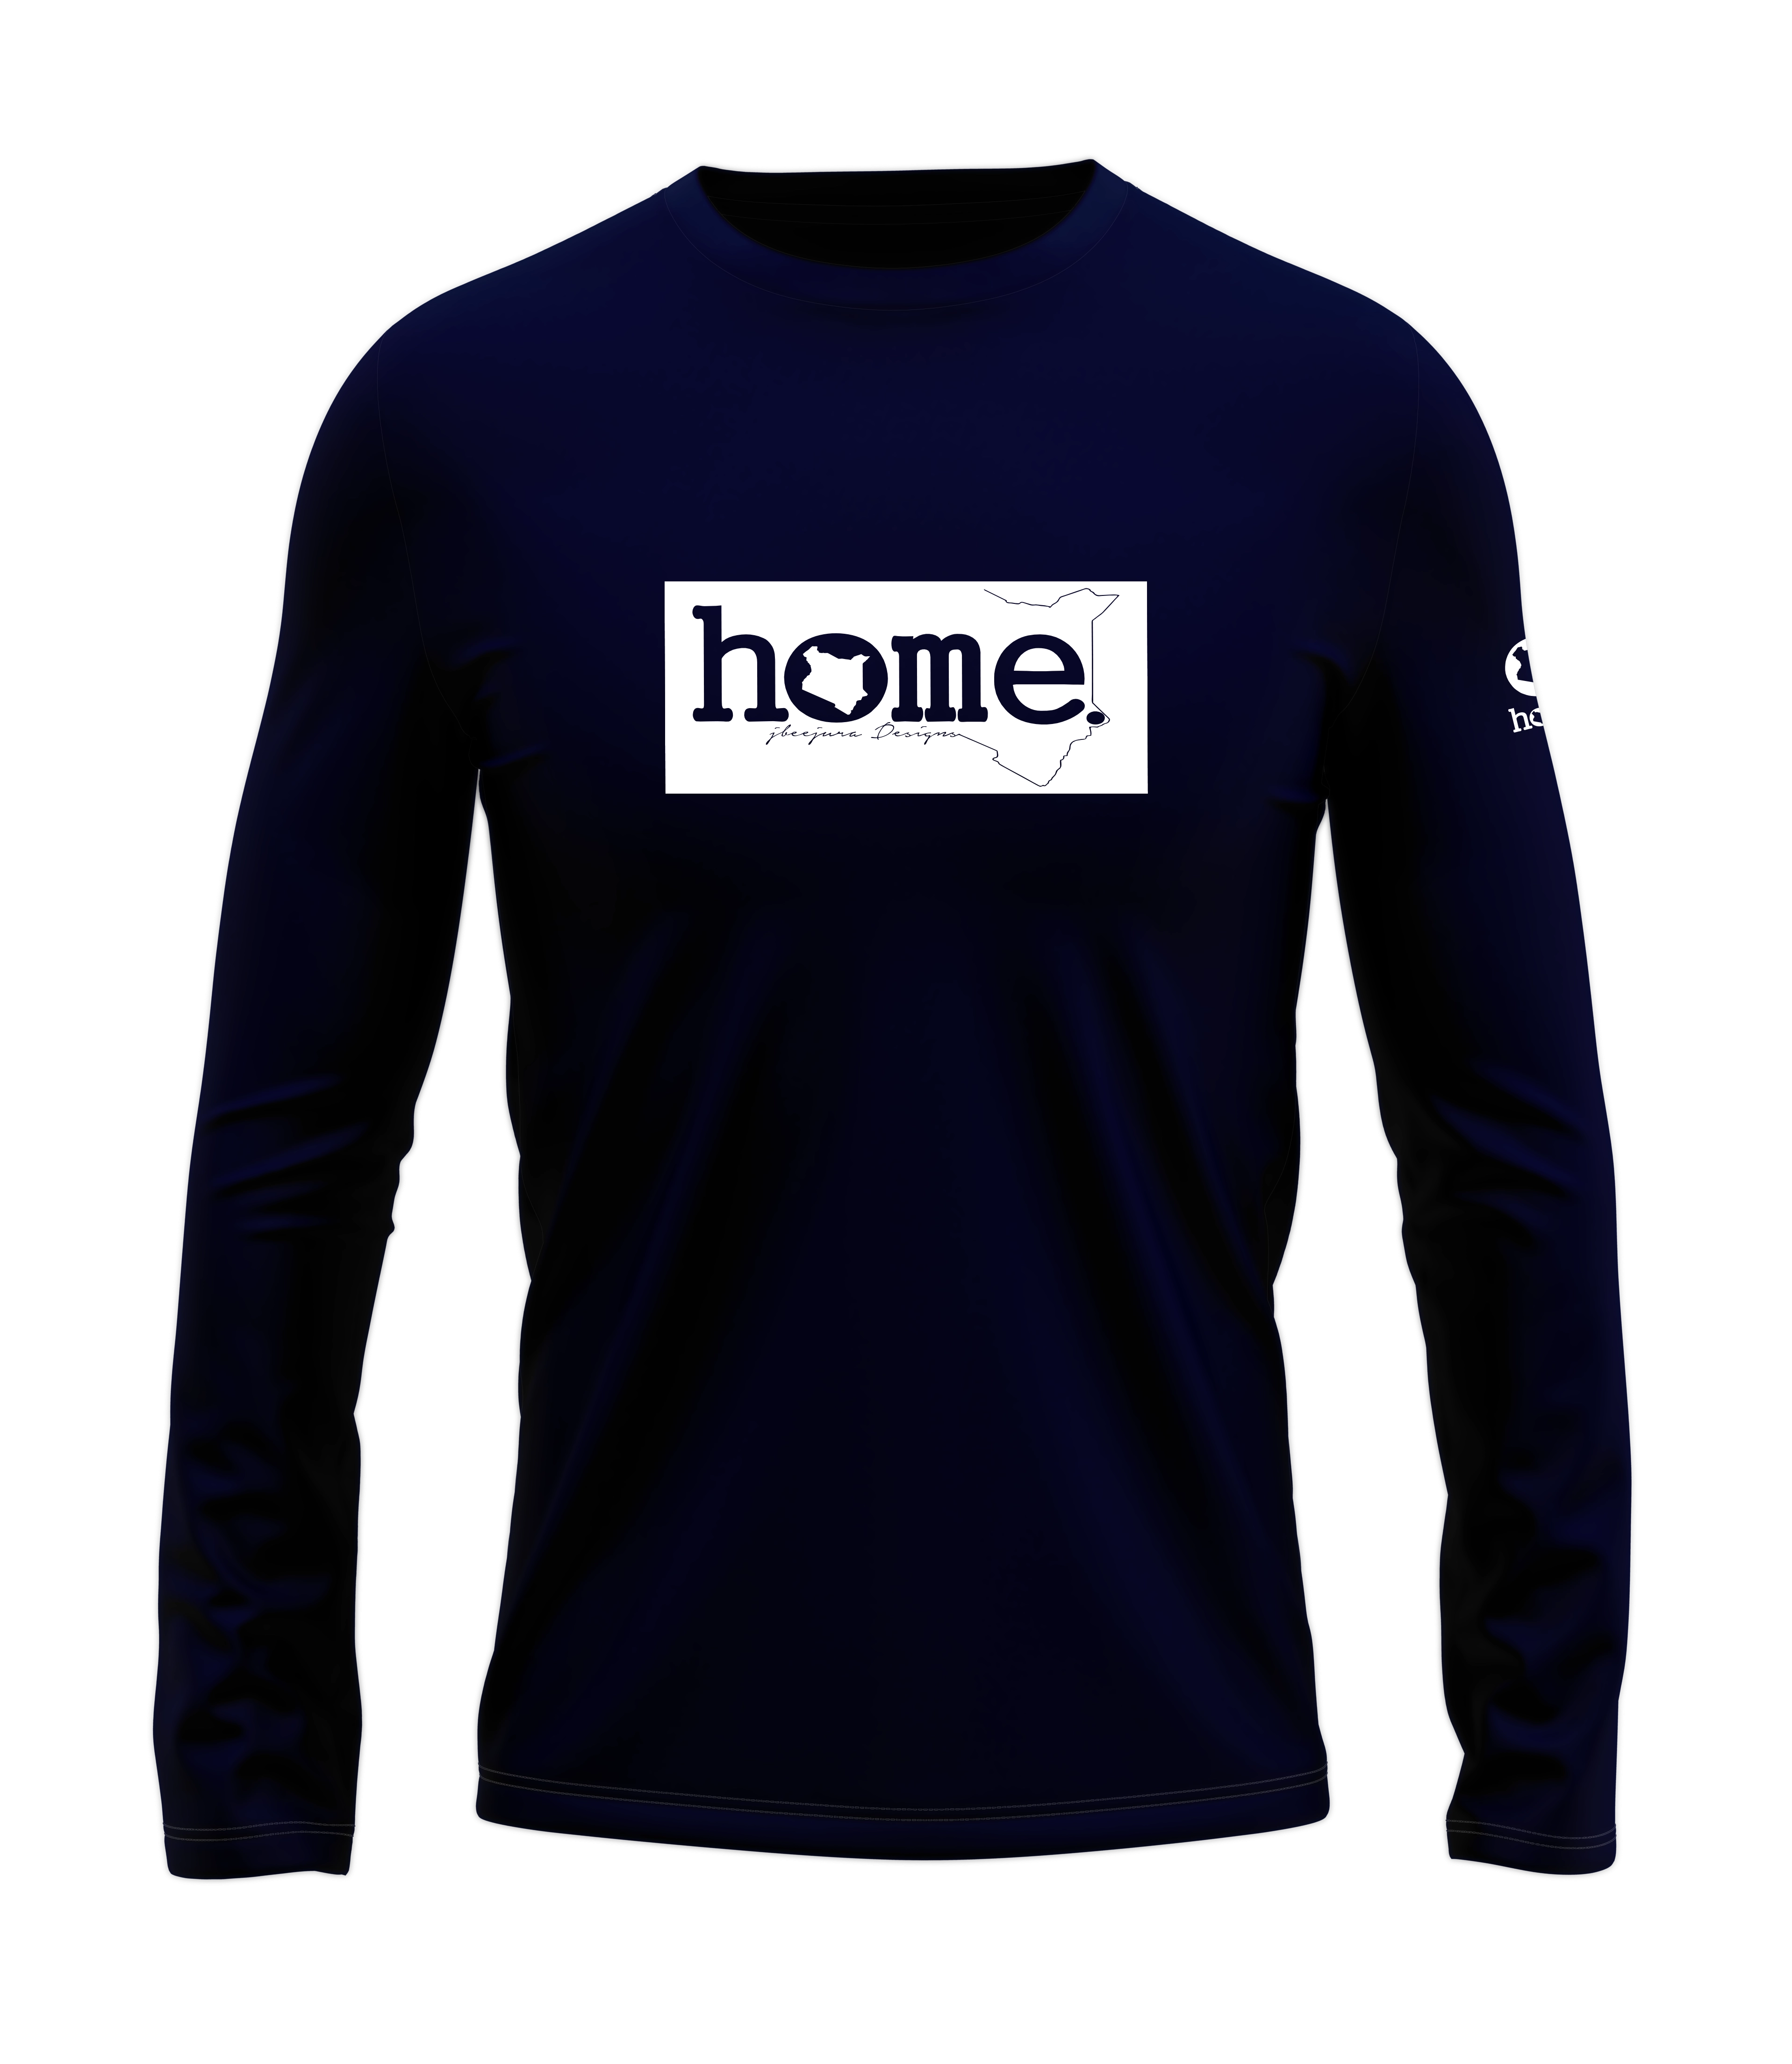 home_254 LONG-SLEEVED NAVY BLUE T-SHIRT WITH A WHITE CLASSIC PRINT – COTTON PLUS FABRIC